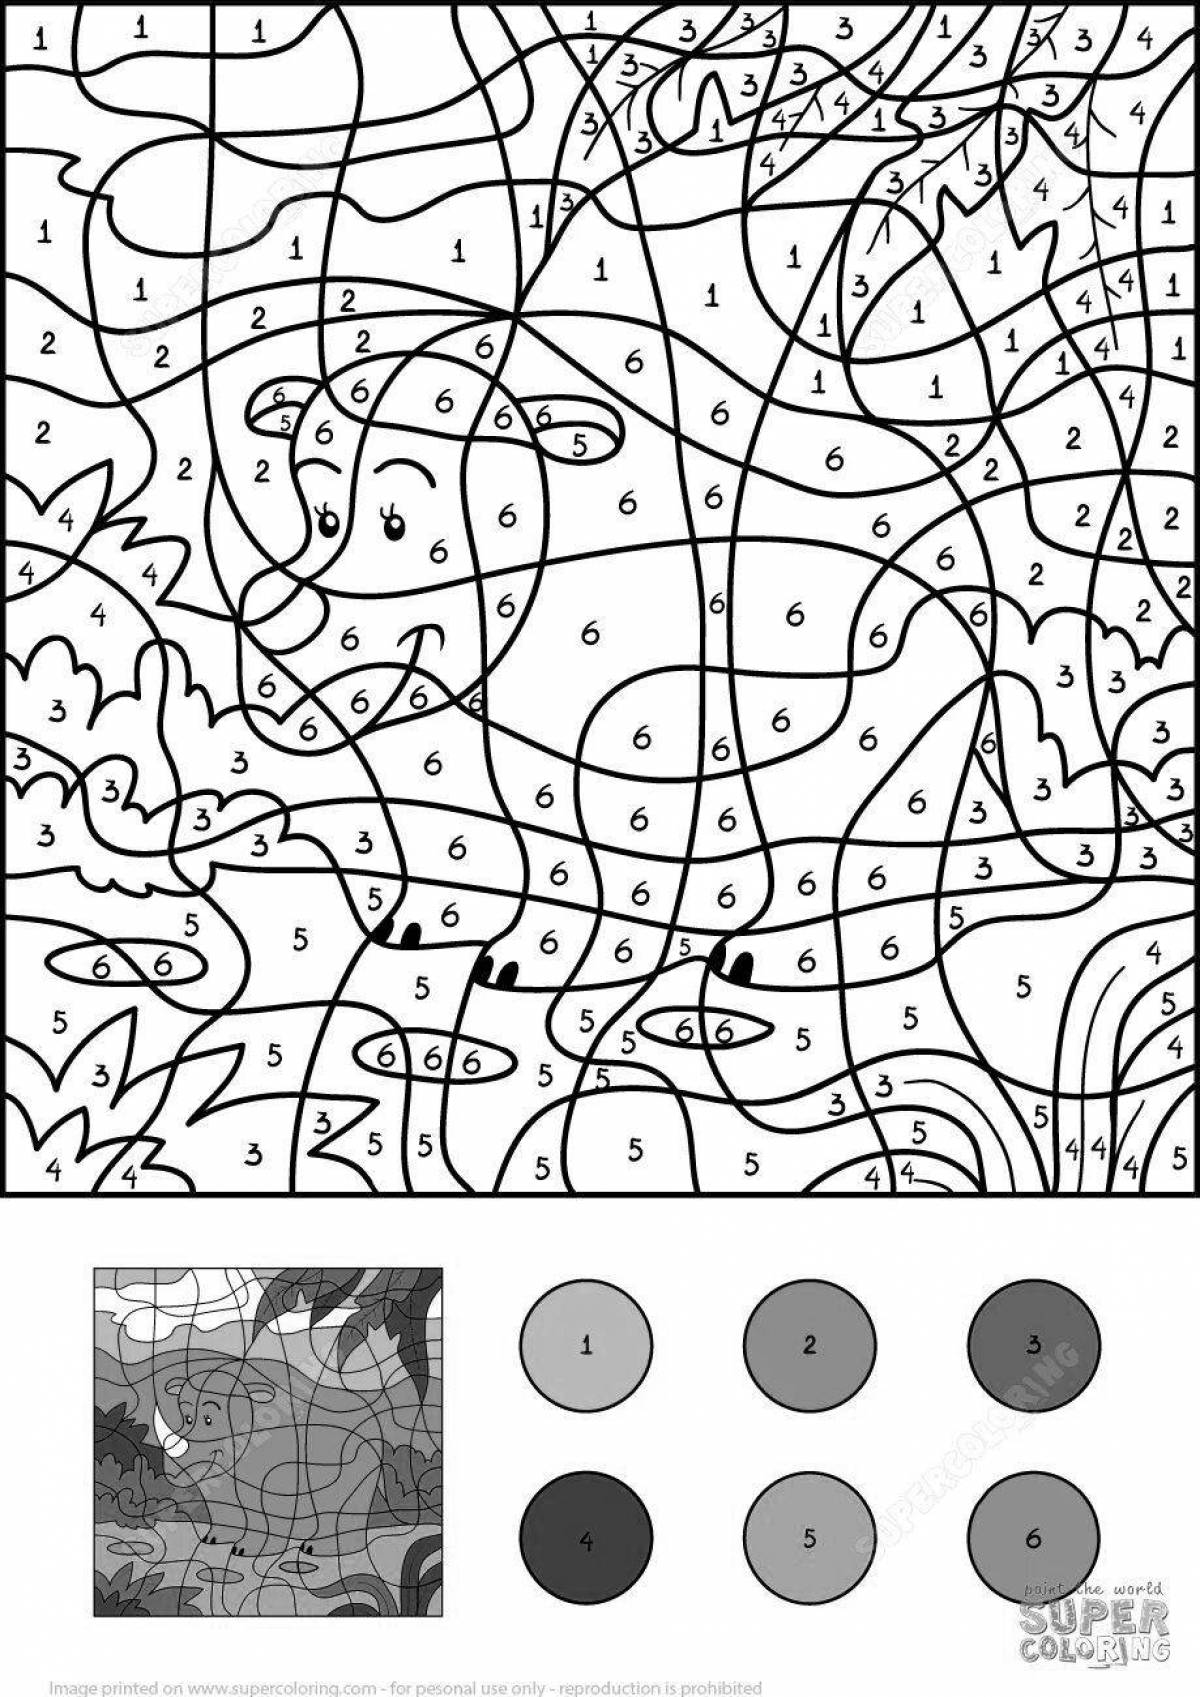 Coloring pages of mosaic figurines